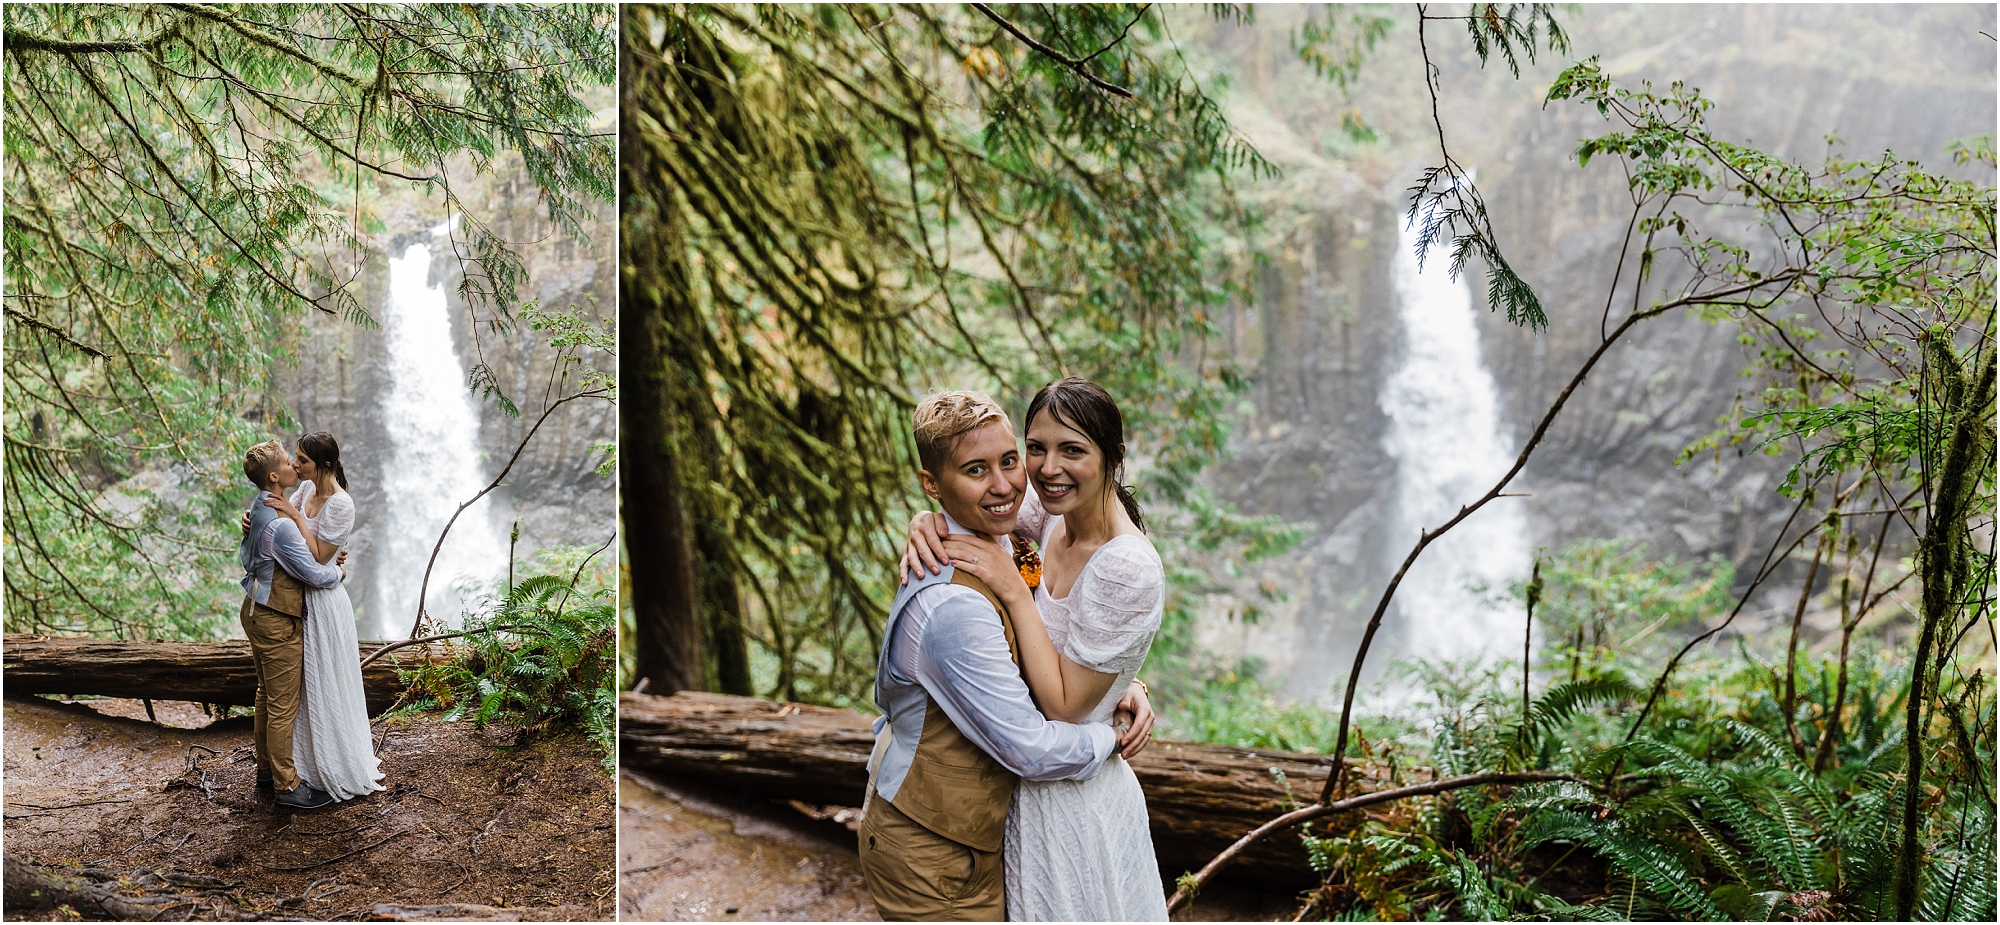 A LGBTQ+ couple pose in their wedding attire in front of Drift Creek Falls in Oregon soaking wet from the pouring rain during their epic PNW hiking adventure elopement. | Erica Swantek Photography